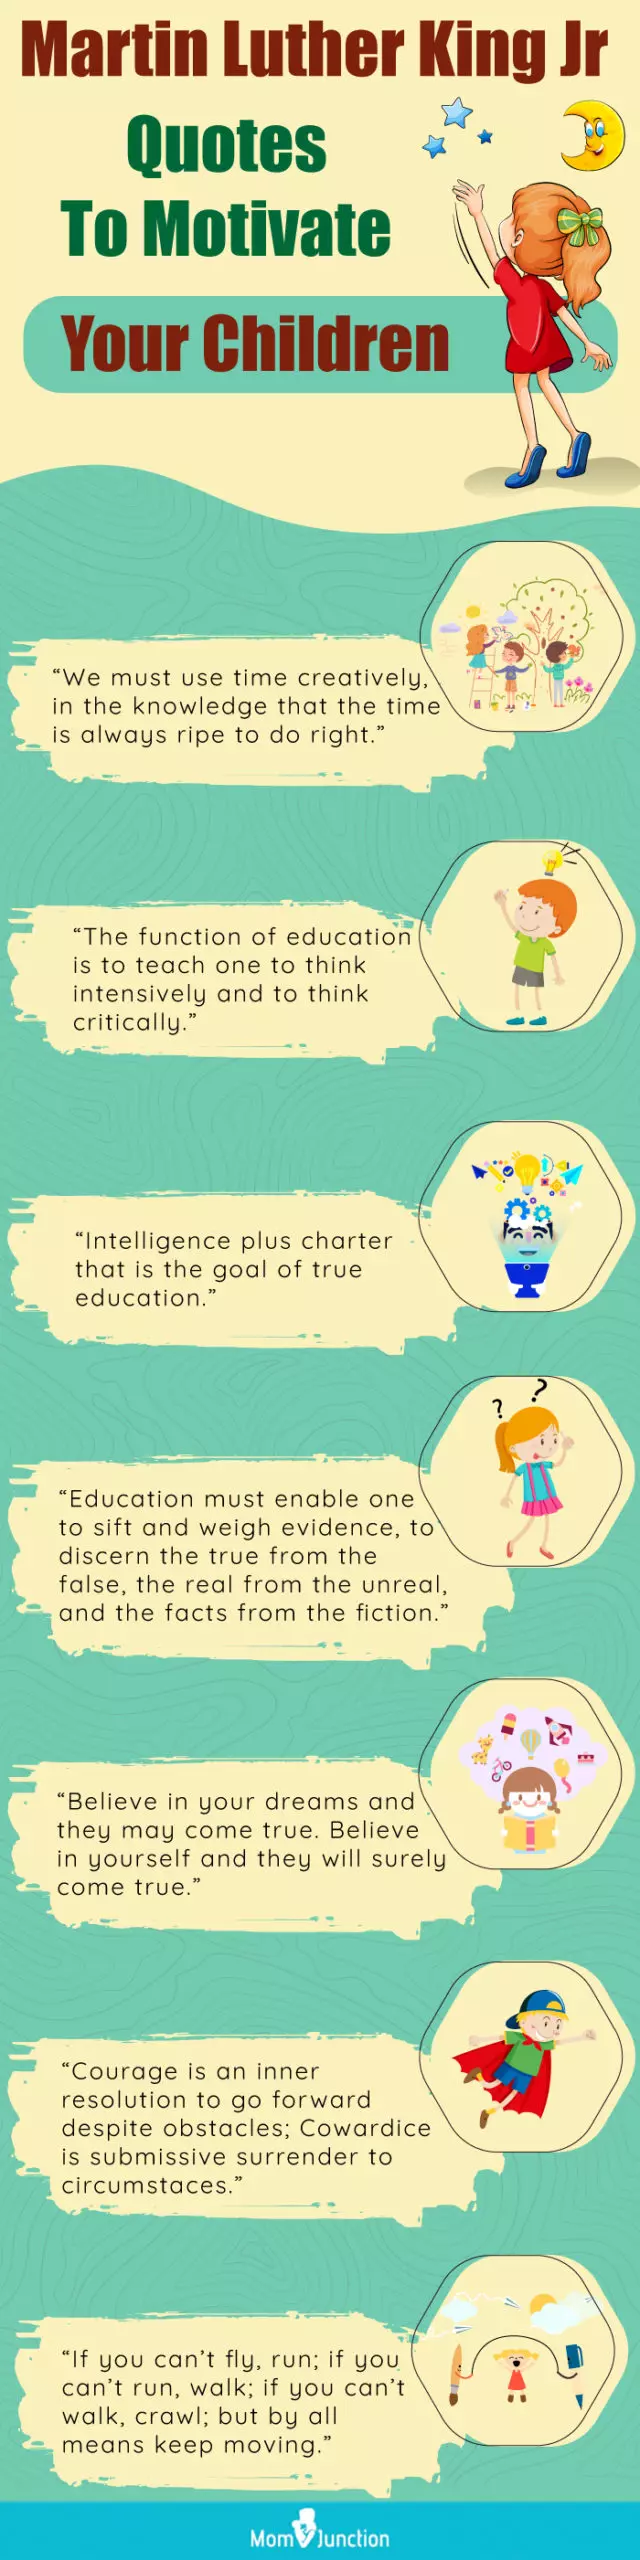 martin luther king jr quotes to motivate your children (infographic)